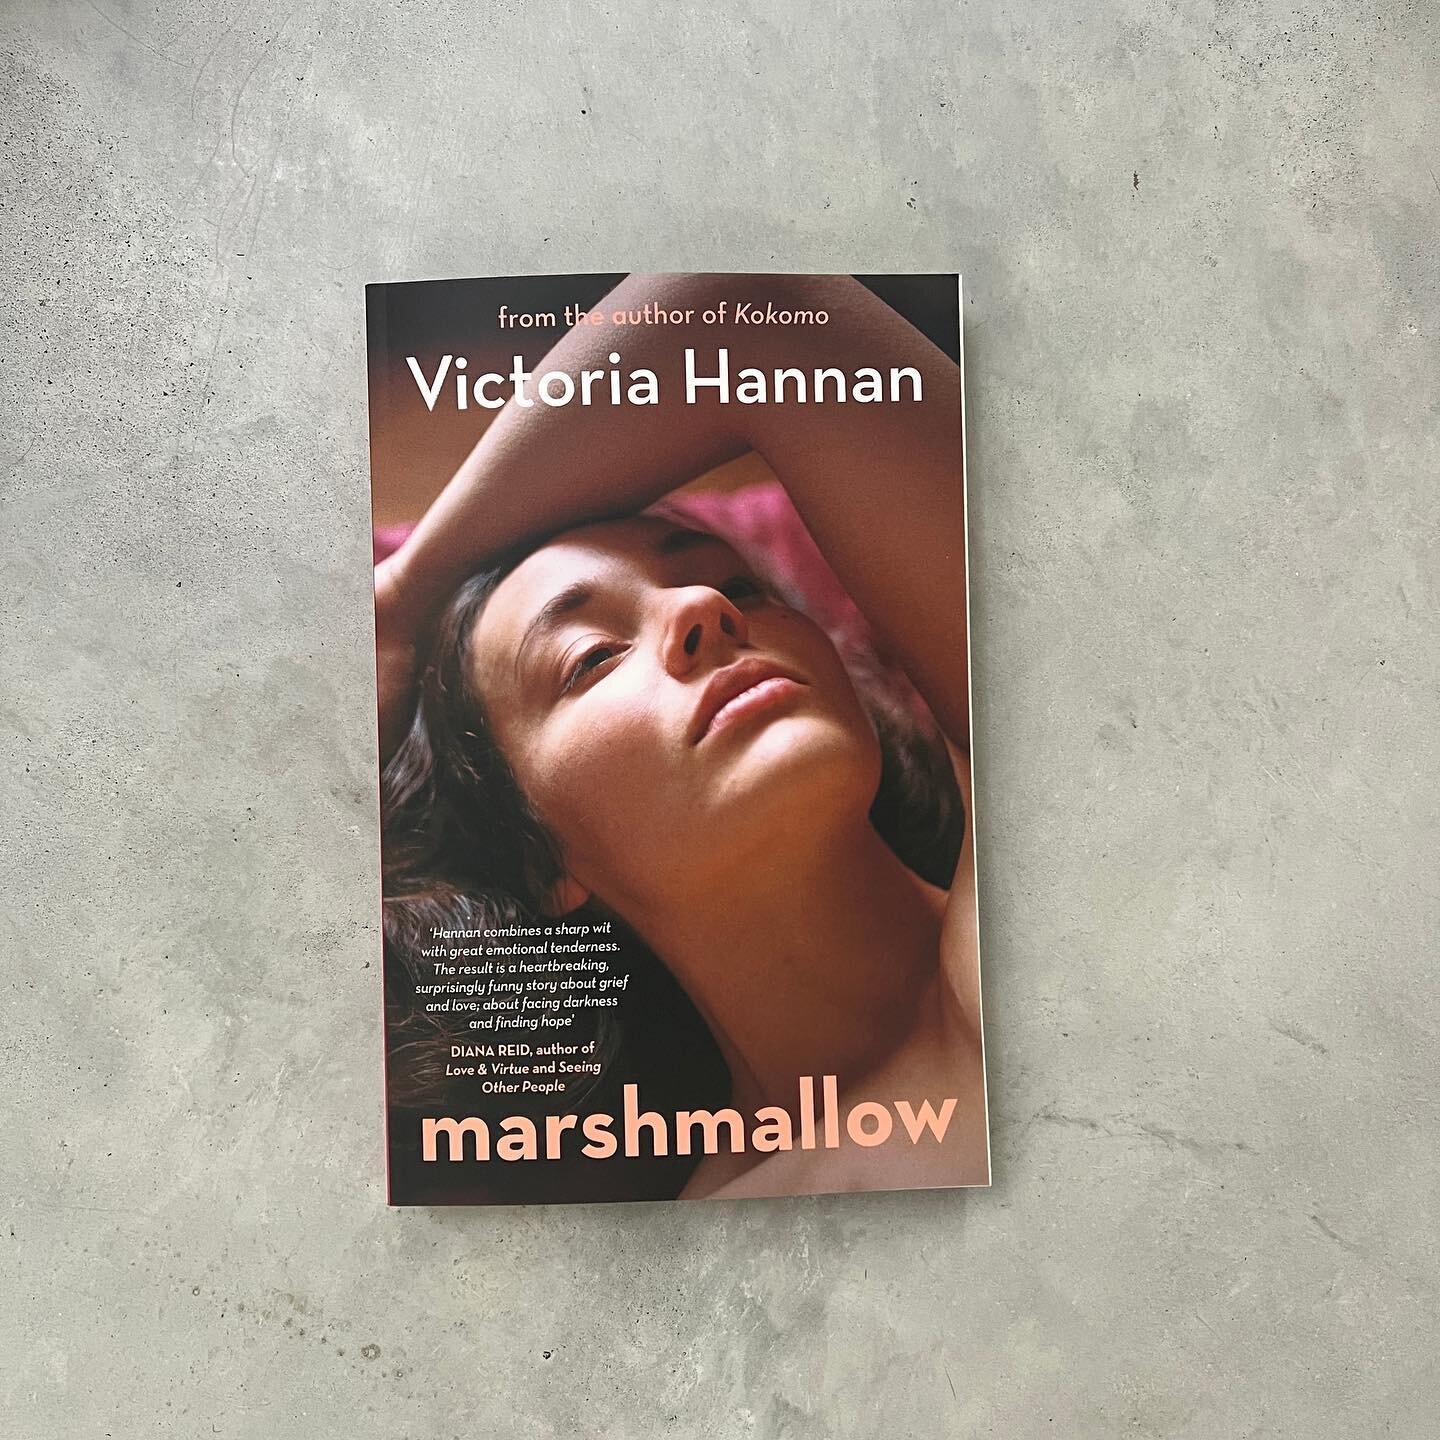 This powerful new work from prizewinning author @victorialhannan is in your favourite bookstore now. Congratulations and Happy Publication!
#happypublication @hachetteaus